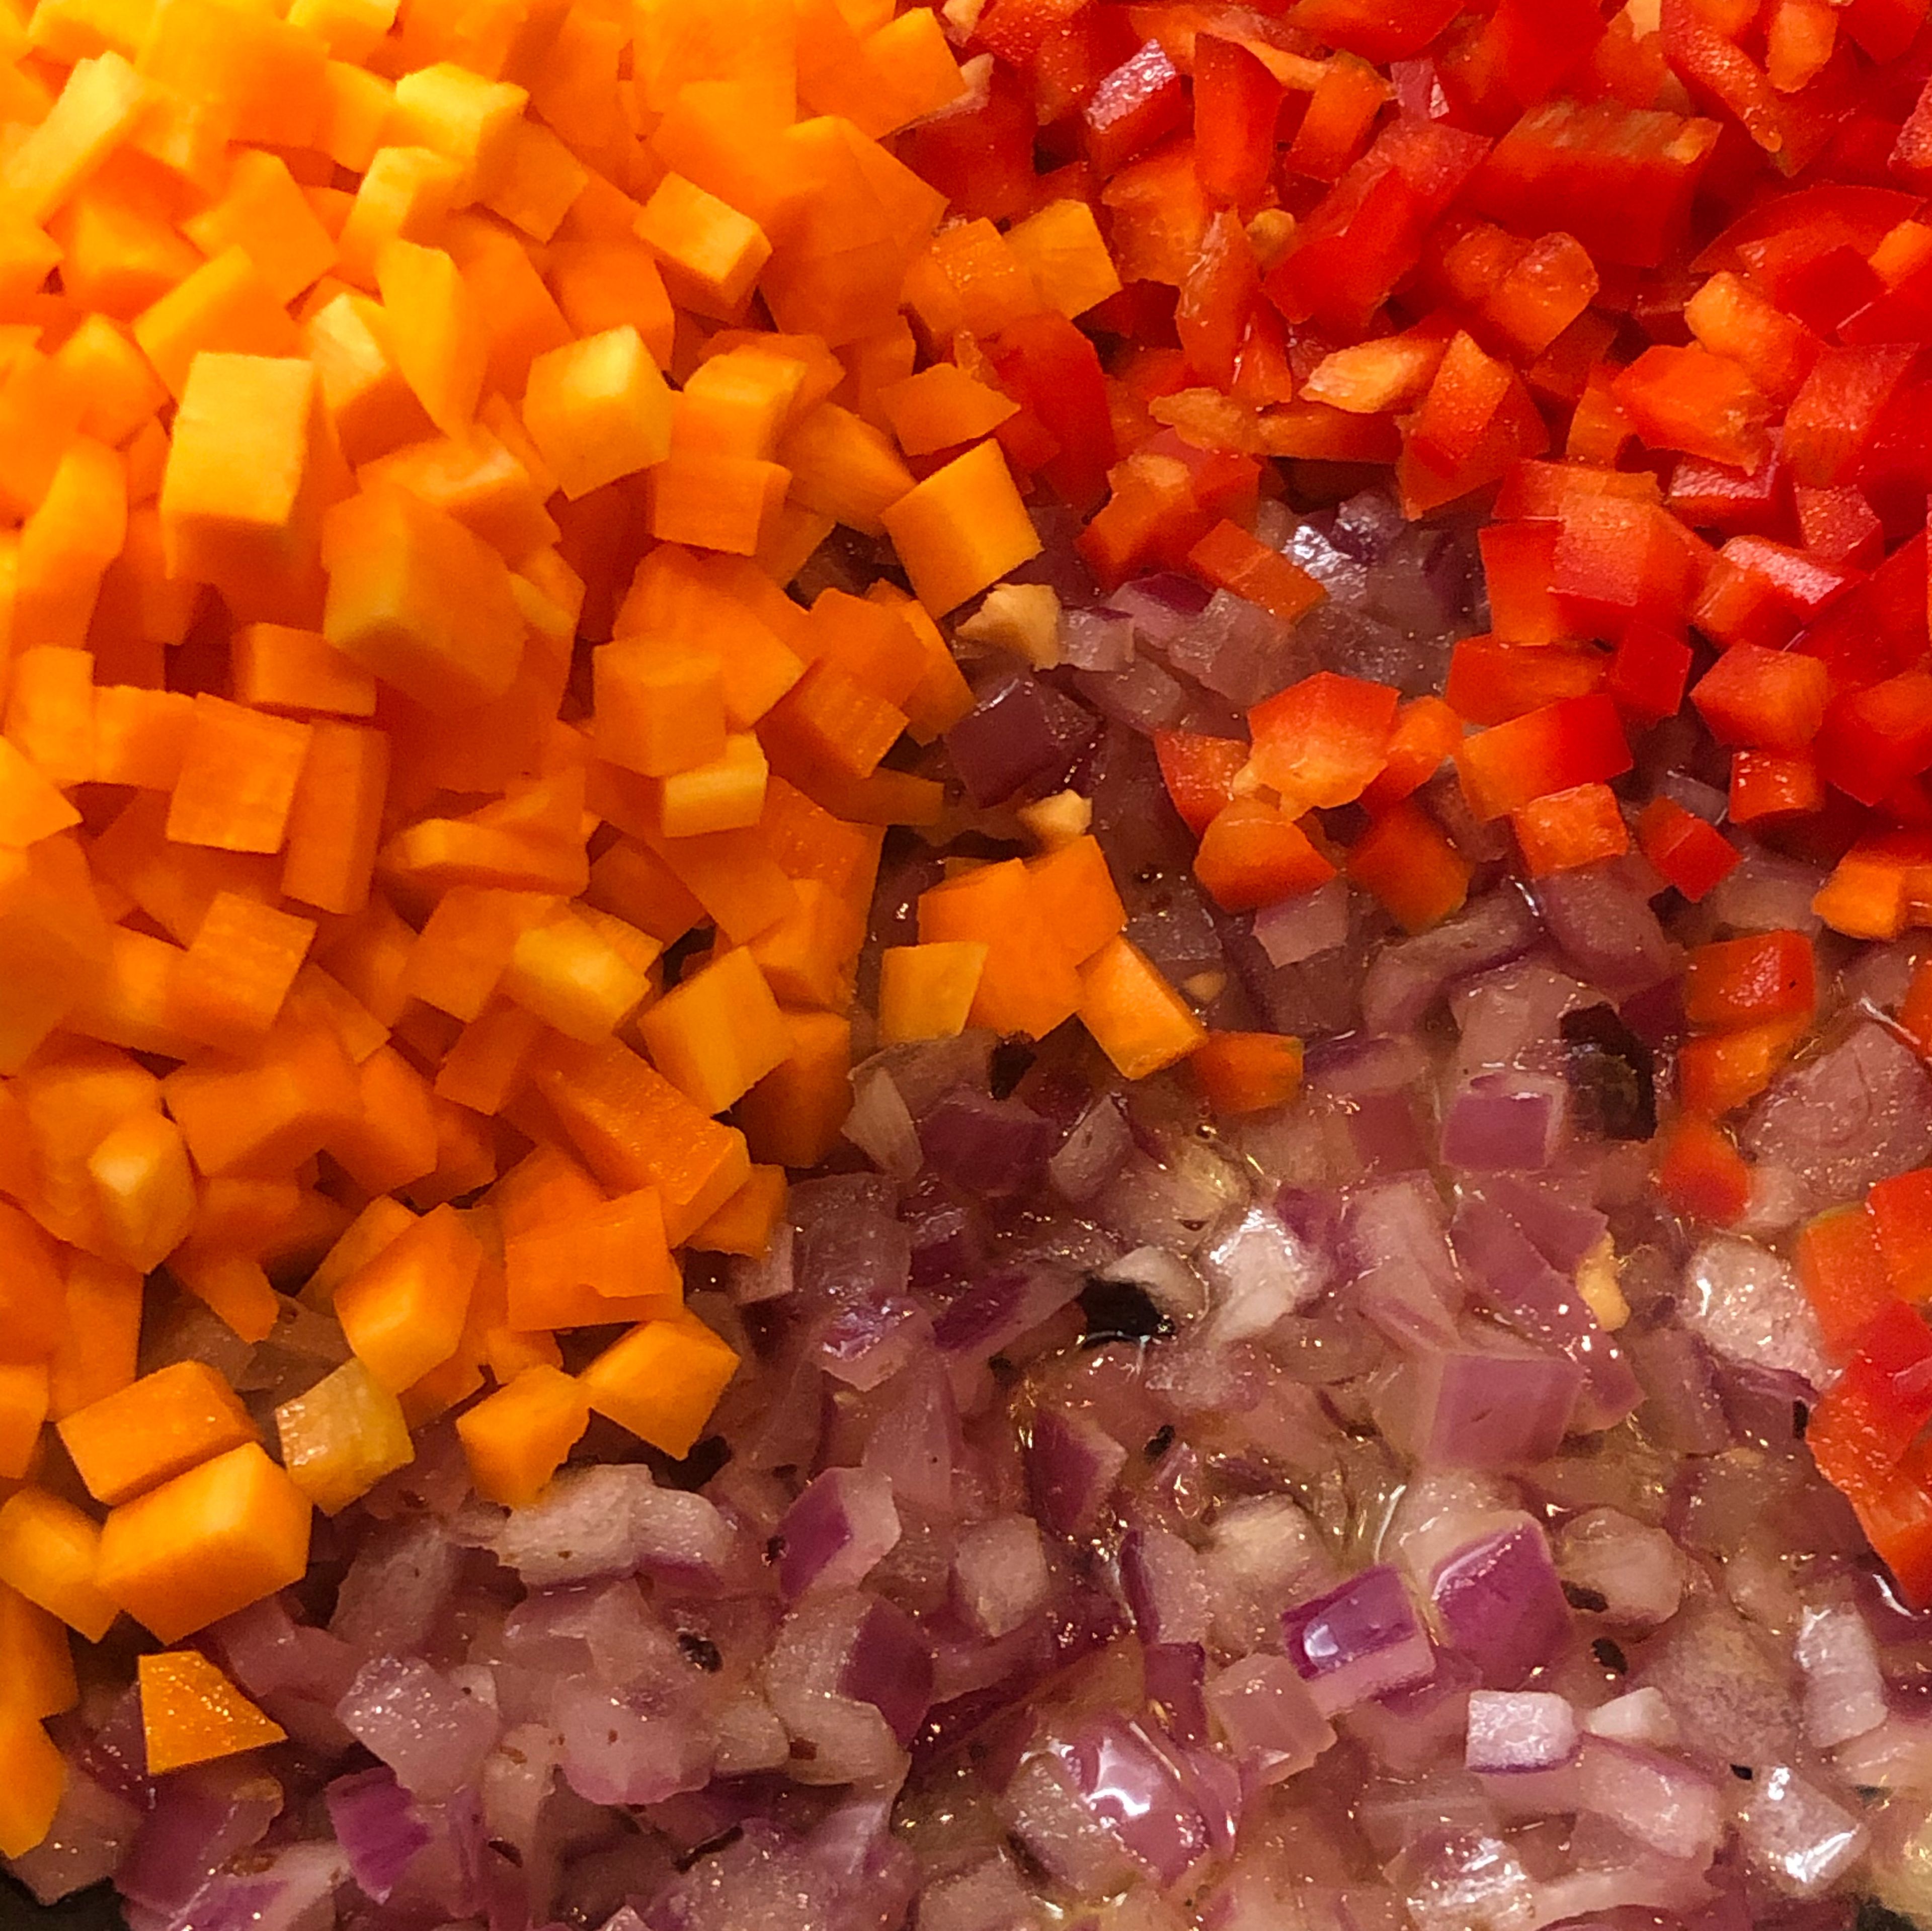 While the quinoa is cooking, you can brunoise the red onion, the carrot and the red bell pepper. Heat olive oil in a wok or a pan and sauté the vegetables. Reserve until the quinoa is ready. You can get creative by adding some spices like curry, thyme, pepper -of course- or whatever you like.